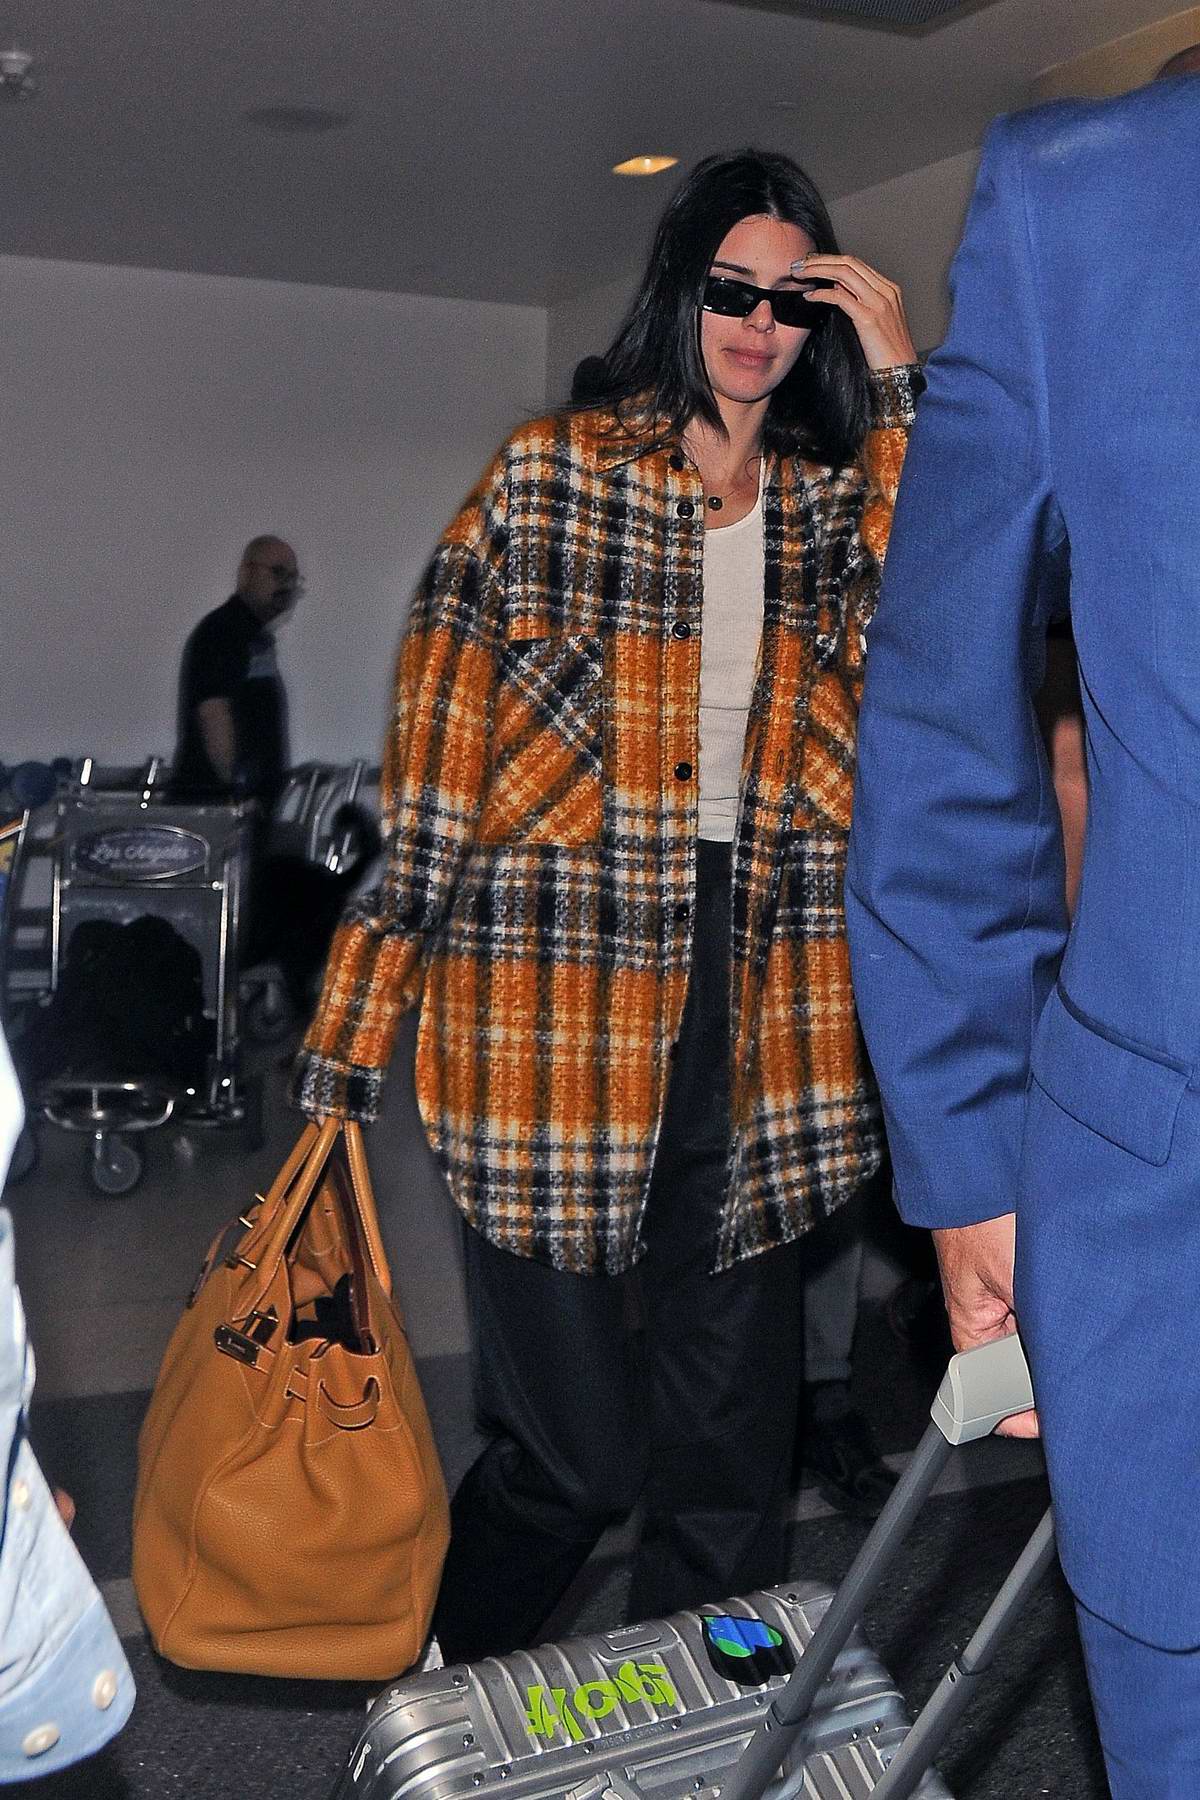 Kendall Jenner tries to avoid the camera as she arrives at LAX airport